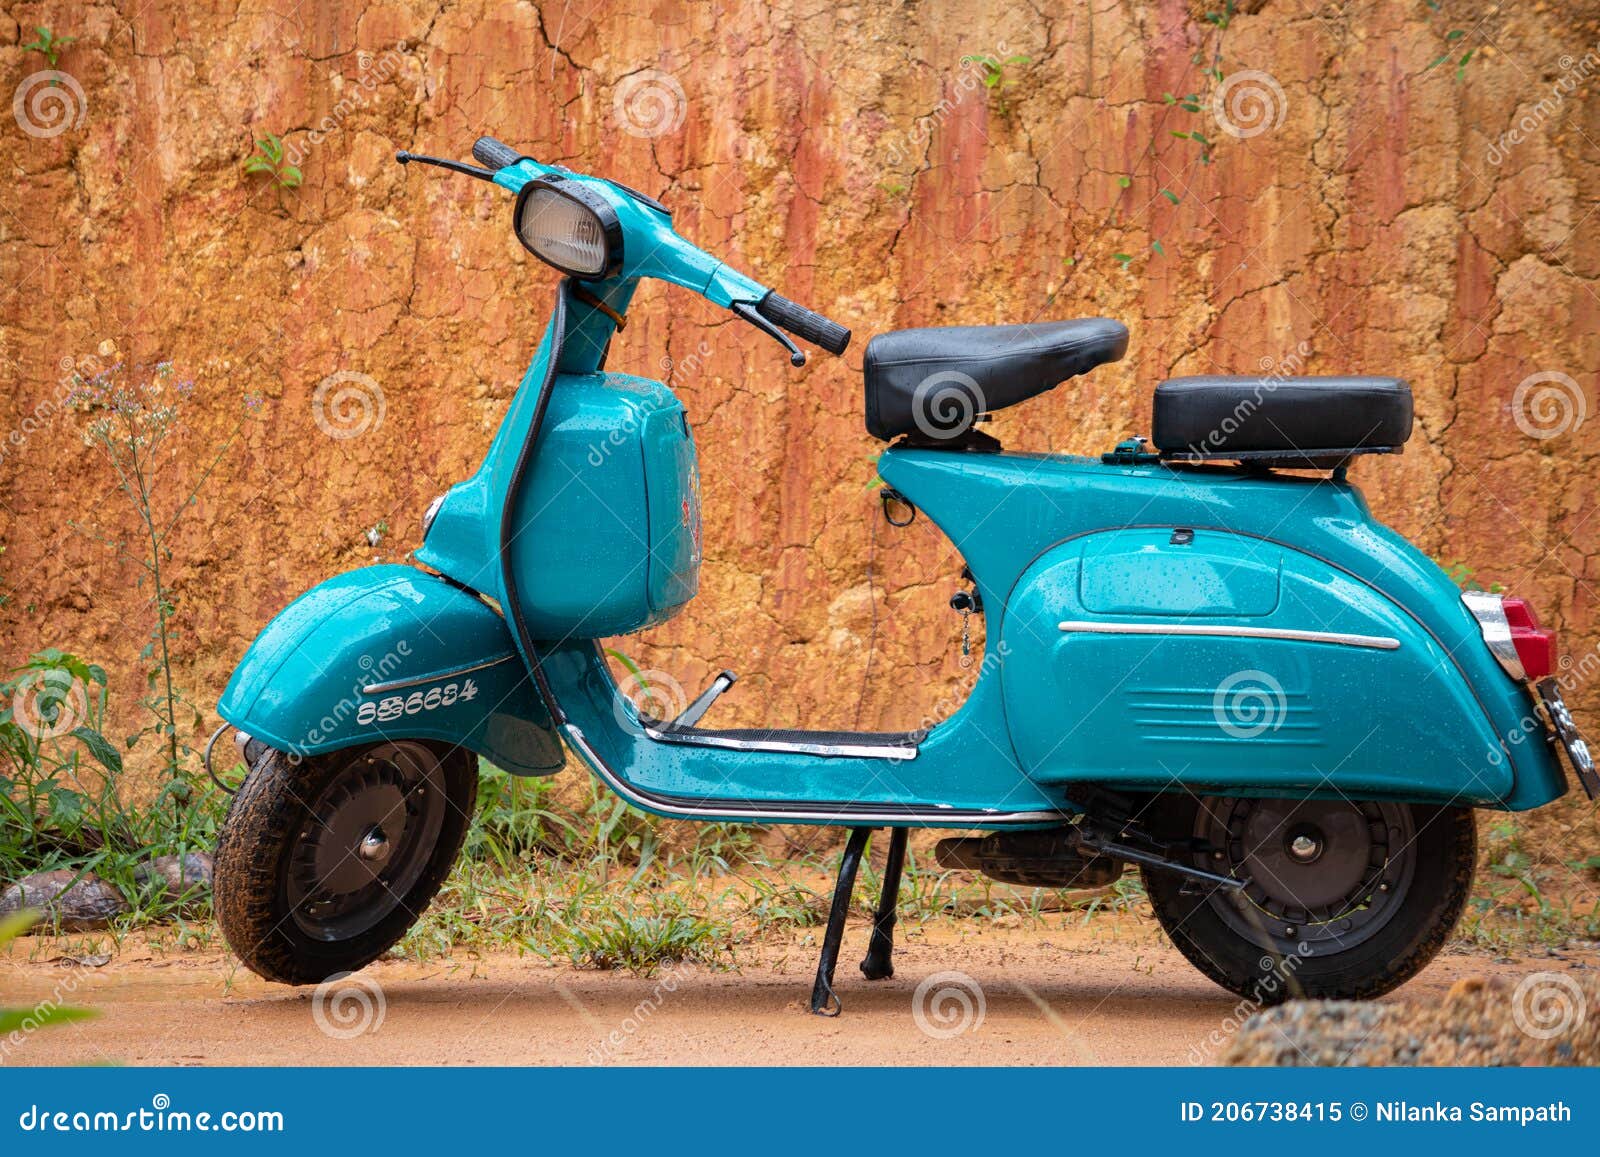 varsel Seminary Metafor Old Vintage Scooter Motorbike in Display Against Clay Wall. Light Blue  Color and Two-seaters, Compartments for Storage, Round Stock Image - Image  of motor, retrostyled: 206738415